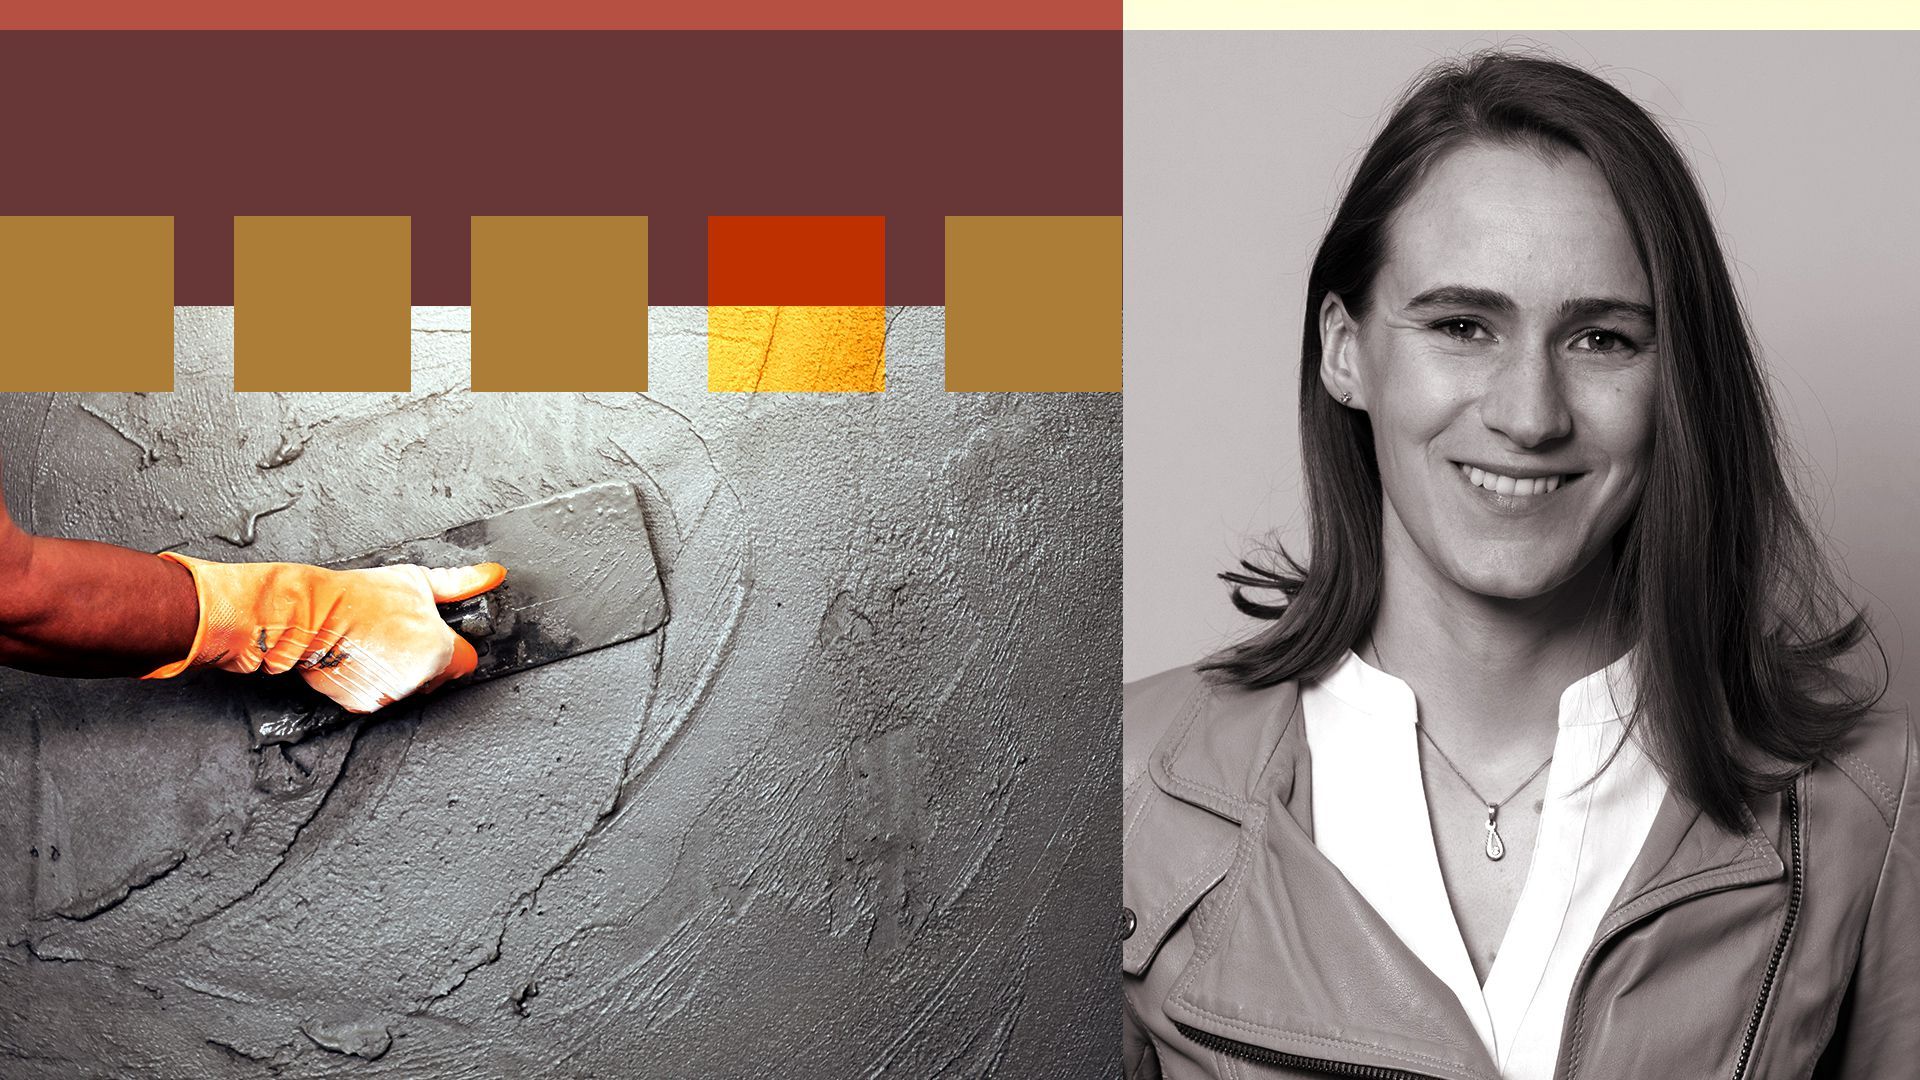 Photo illustration of Leah Ellis with an image of someone spreading cement.